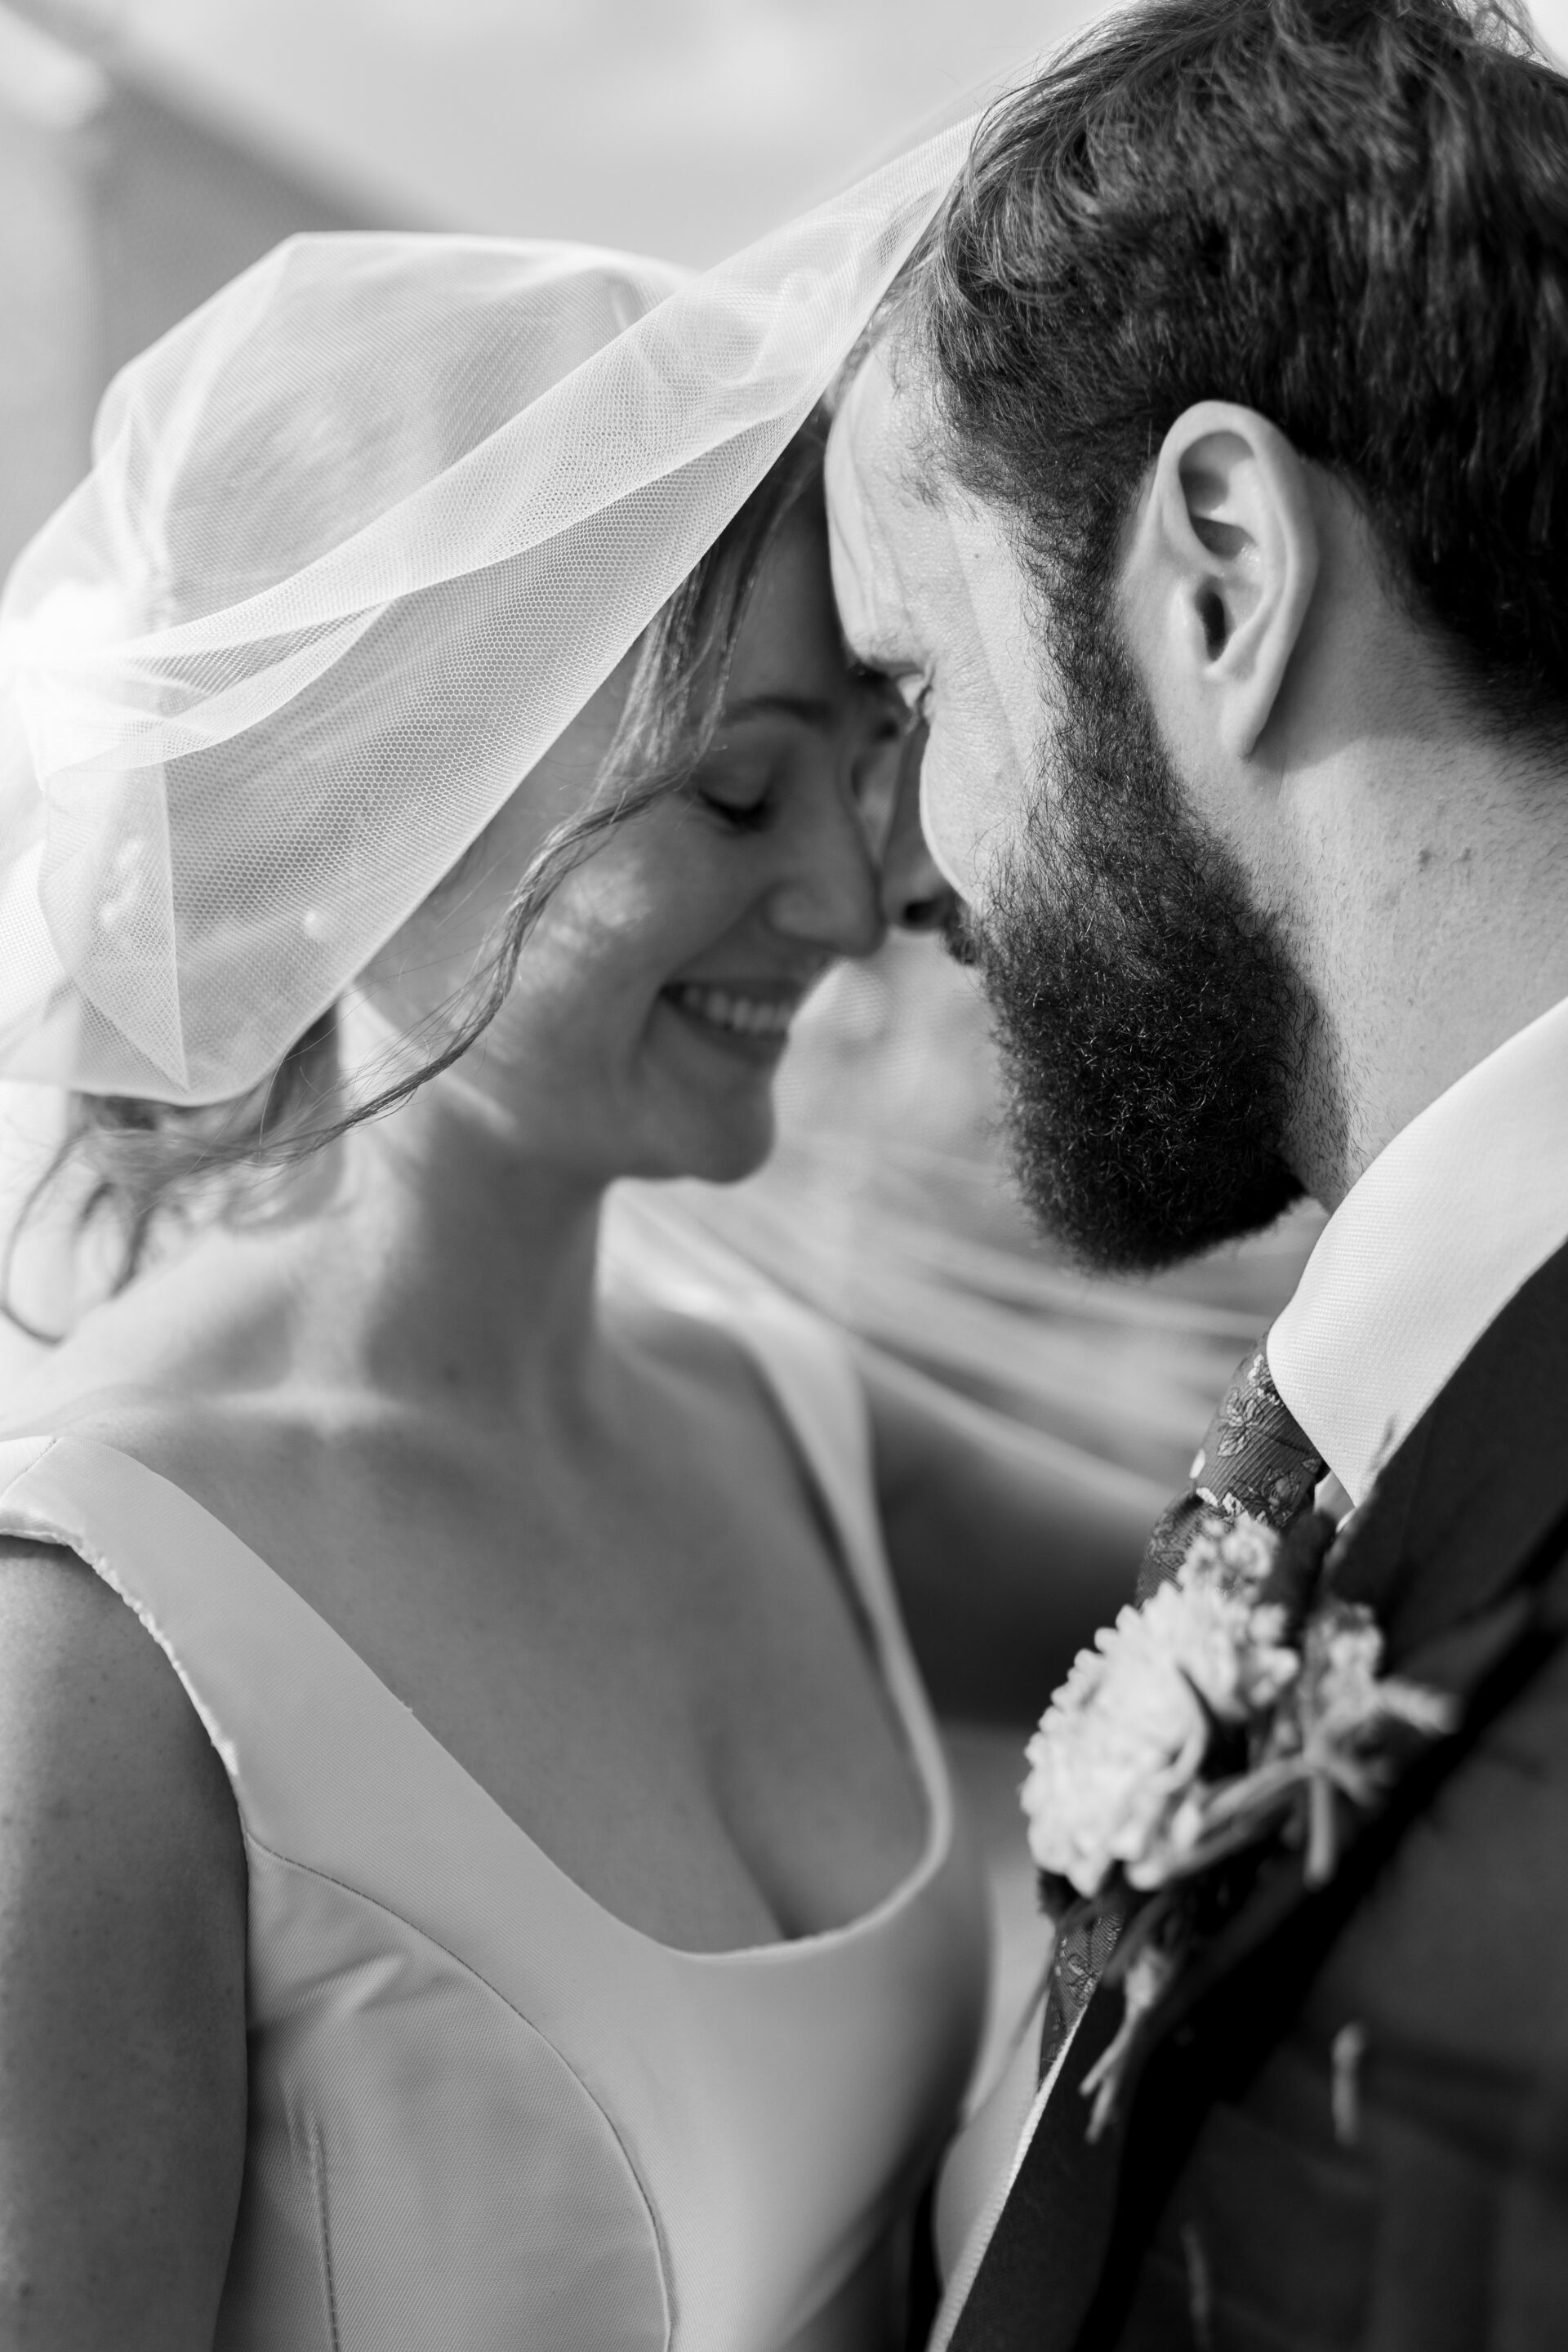 The bride and groom share an embrace under the veil during their couples portrait session